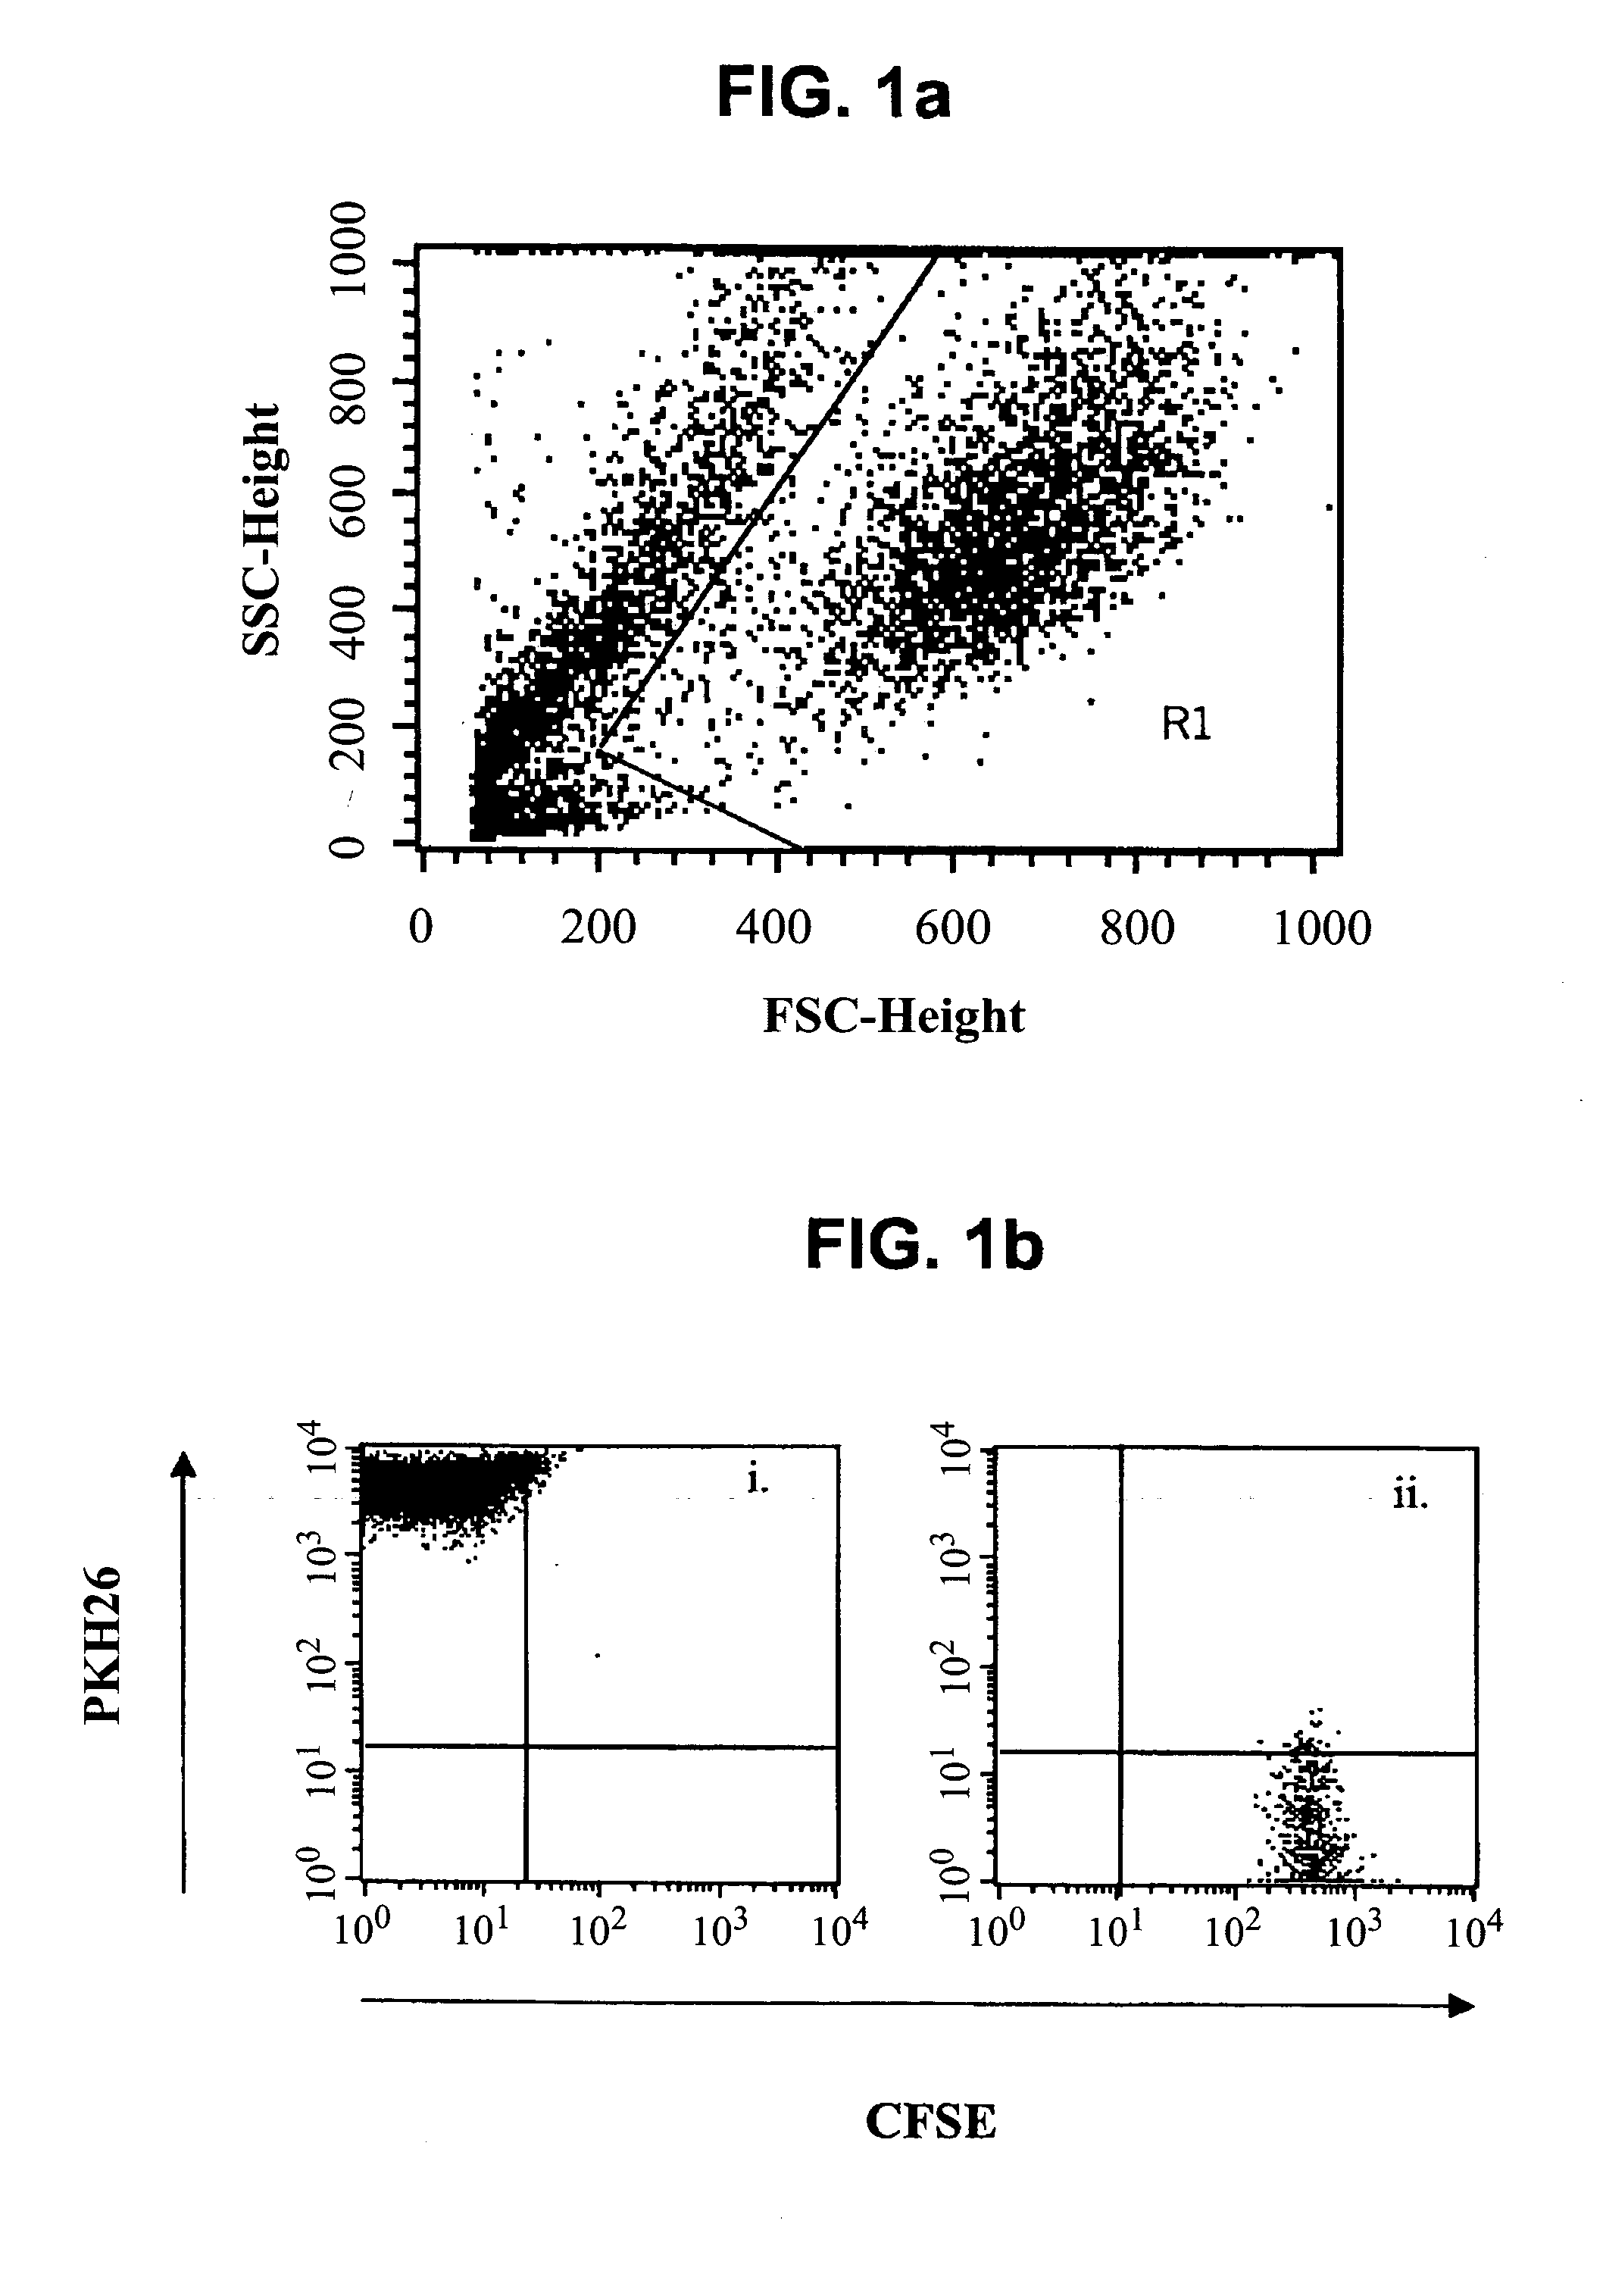 Methods of detecting specific cell lysis